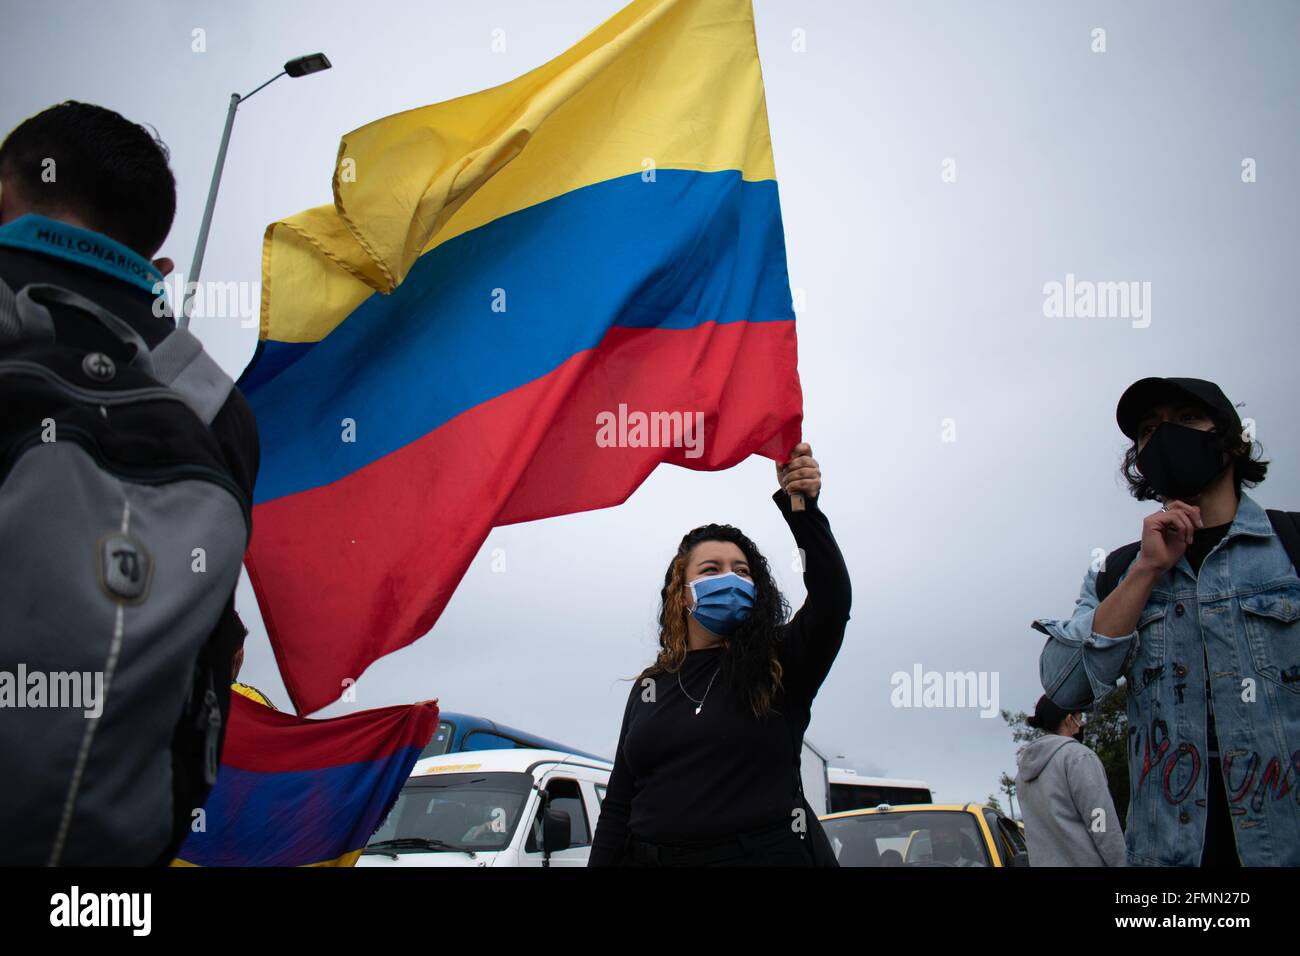 Bogota, Cundinamarca, Colombia. 10th May, 2021. Demonstrators with Colombian flags participate in a protest as Bogota faces its 13 day of anti-government protests against the Health Reform and Police Brutality cases that rise to over 30 dead across the country since the National Strike begun. In Bogota, Colombia on May 10, 2021 Credit: Daniel Santiago Romero Chaparro/LongVisual/ZUMA Wire/Alamy Live News Stock Photo